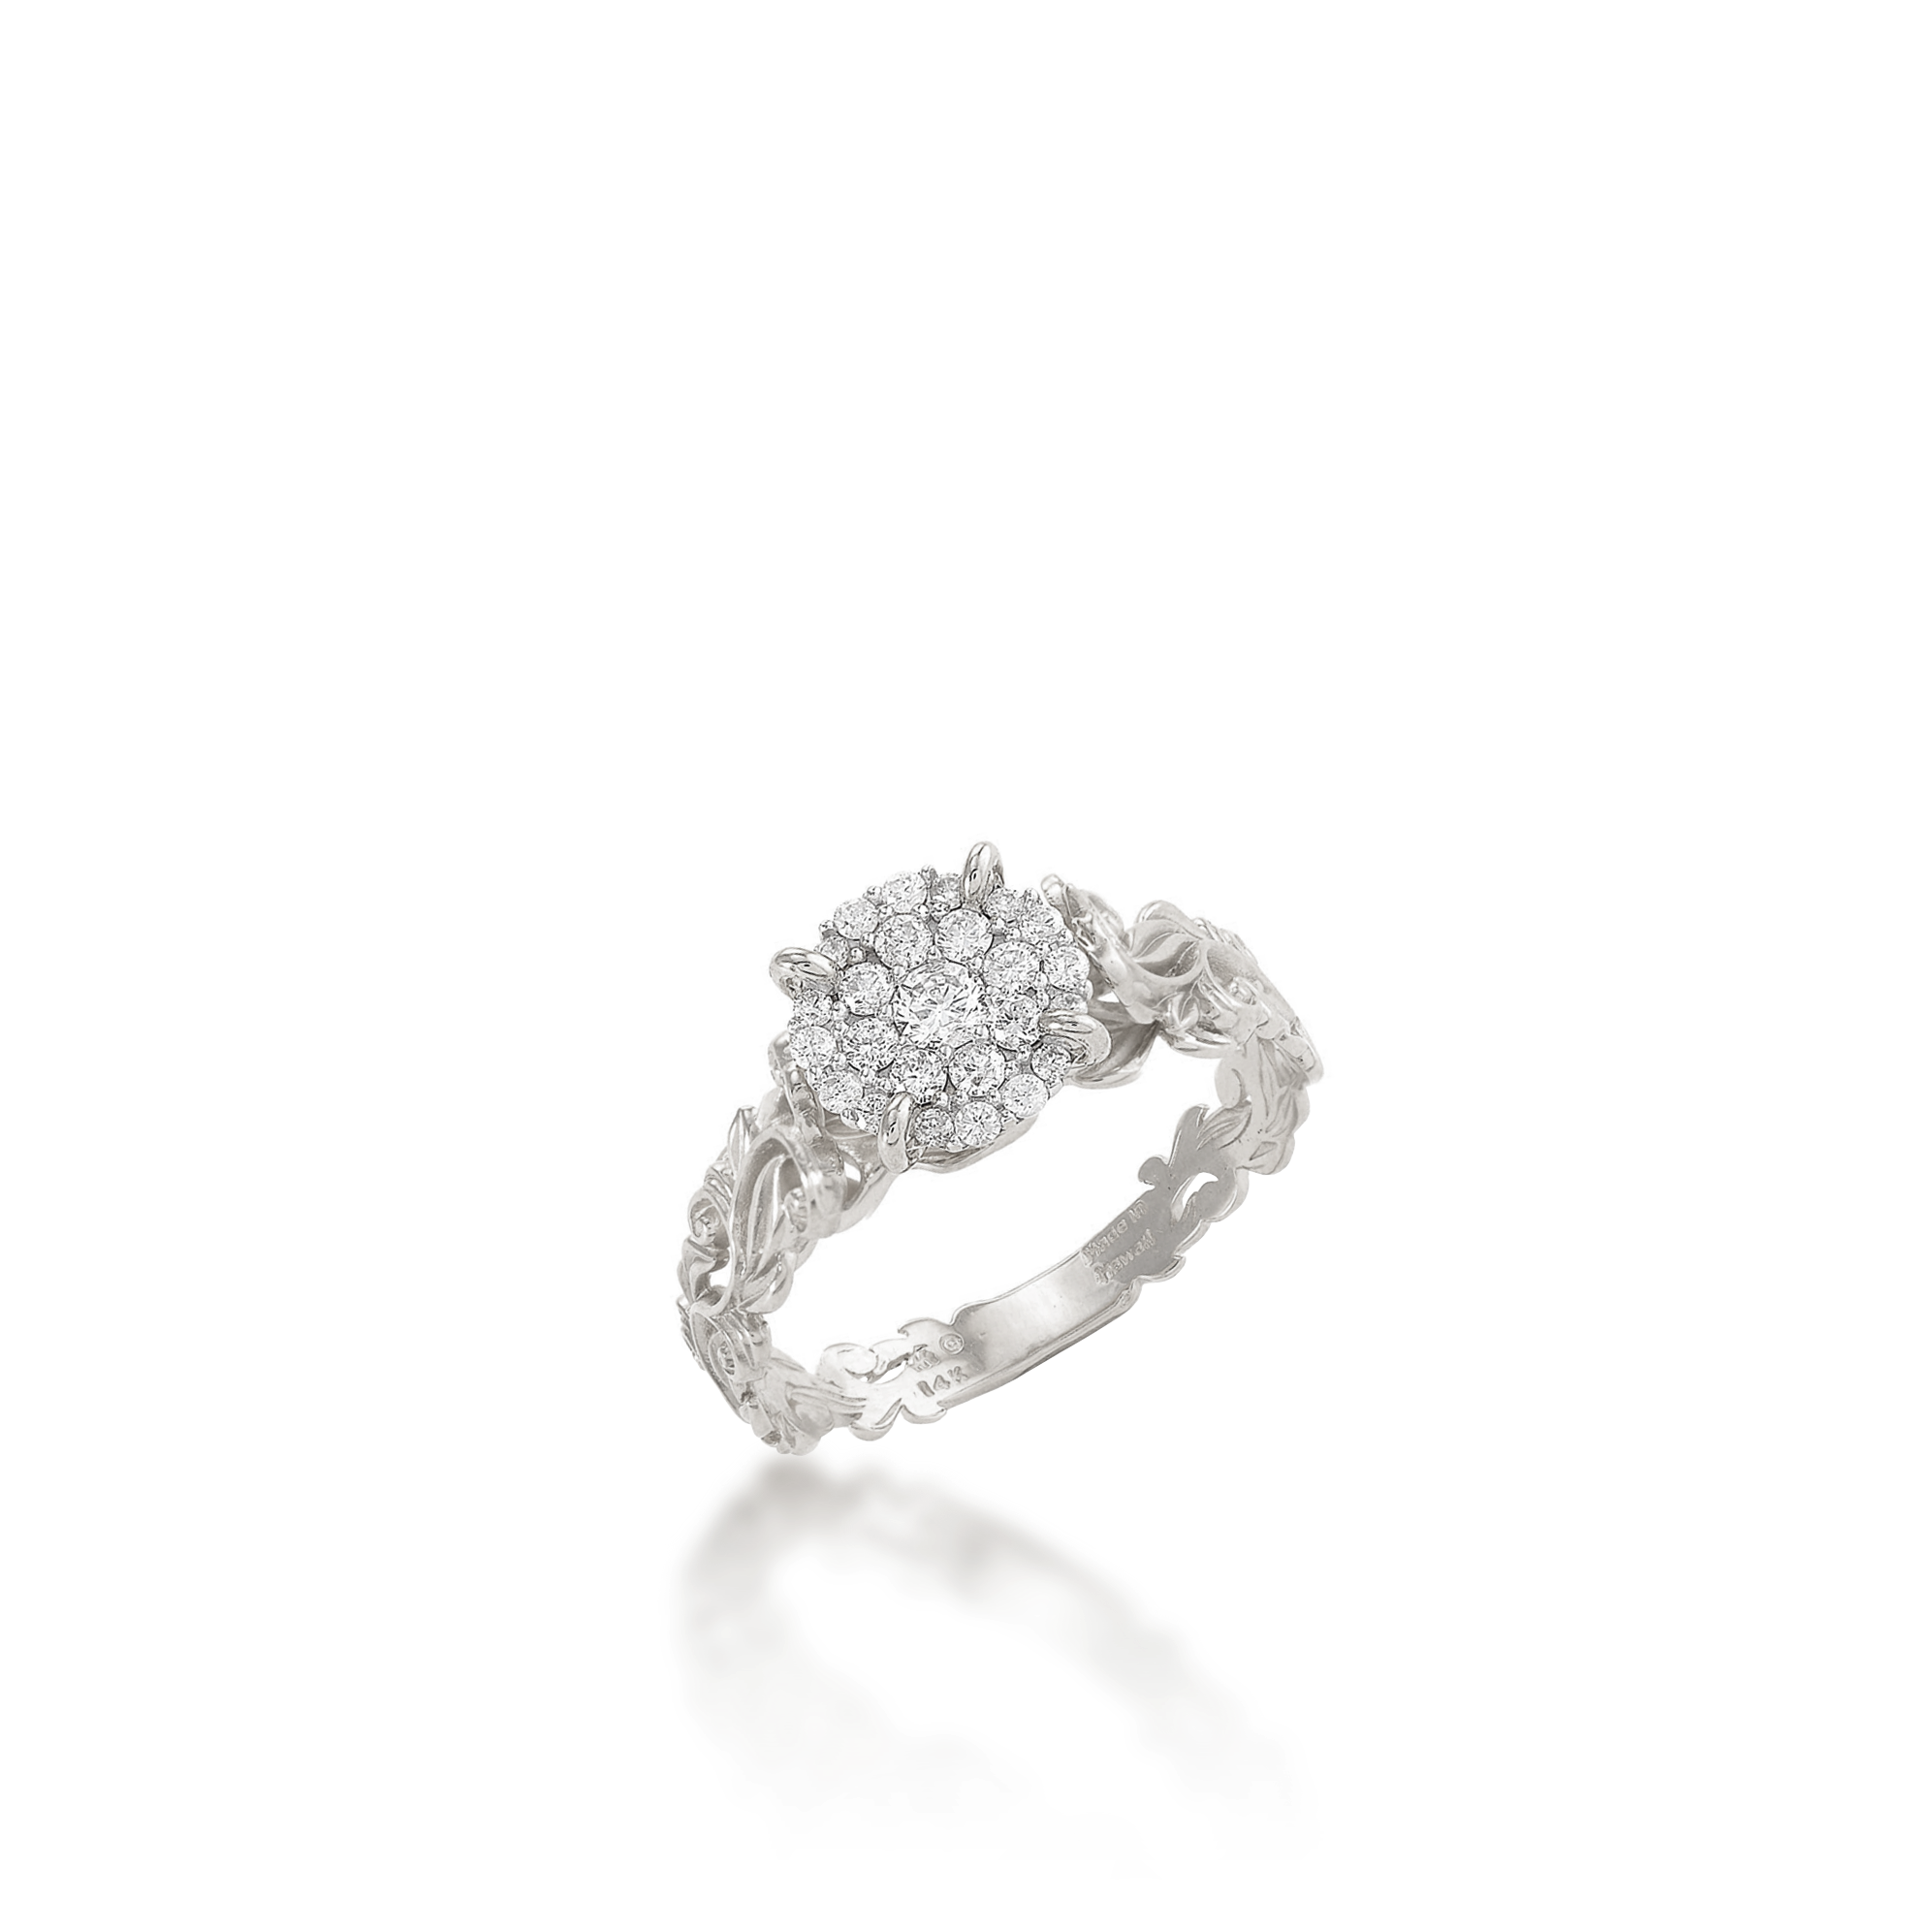 Living Heirloom Engagement Ring in White Gold with Diamonds